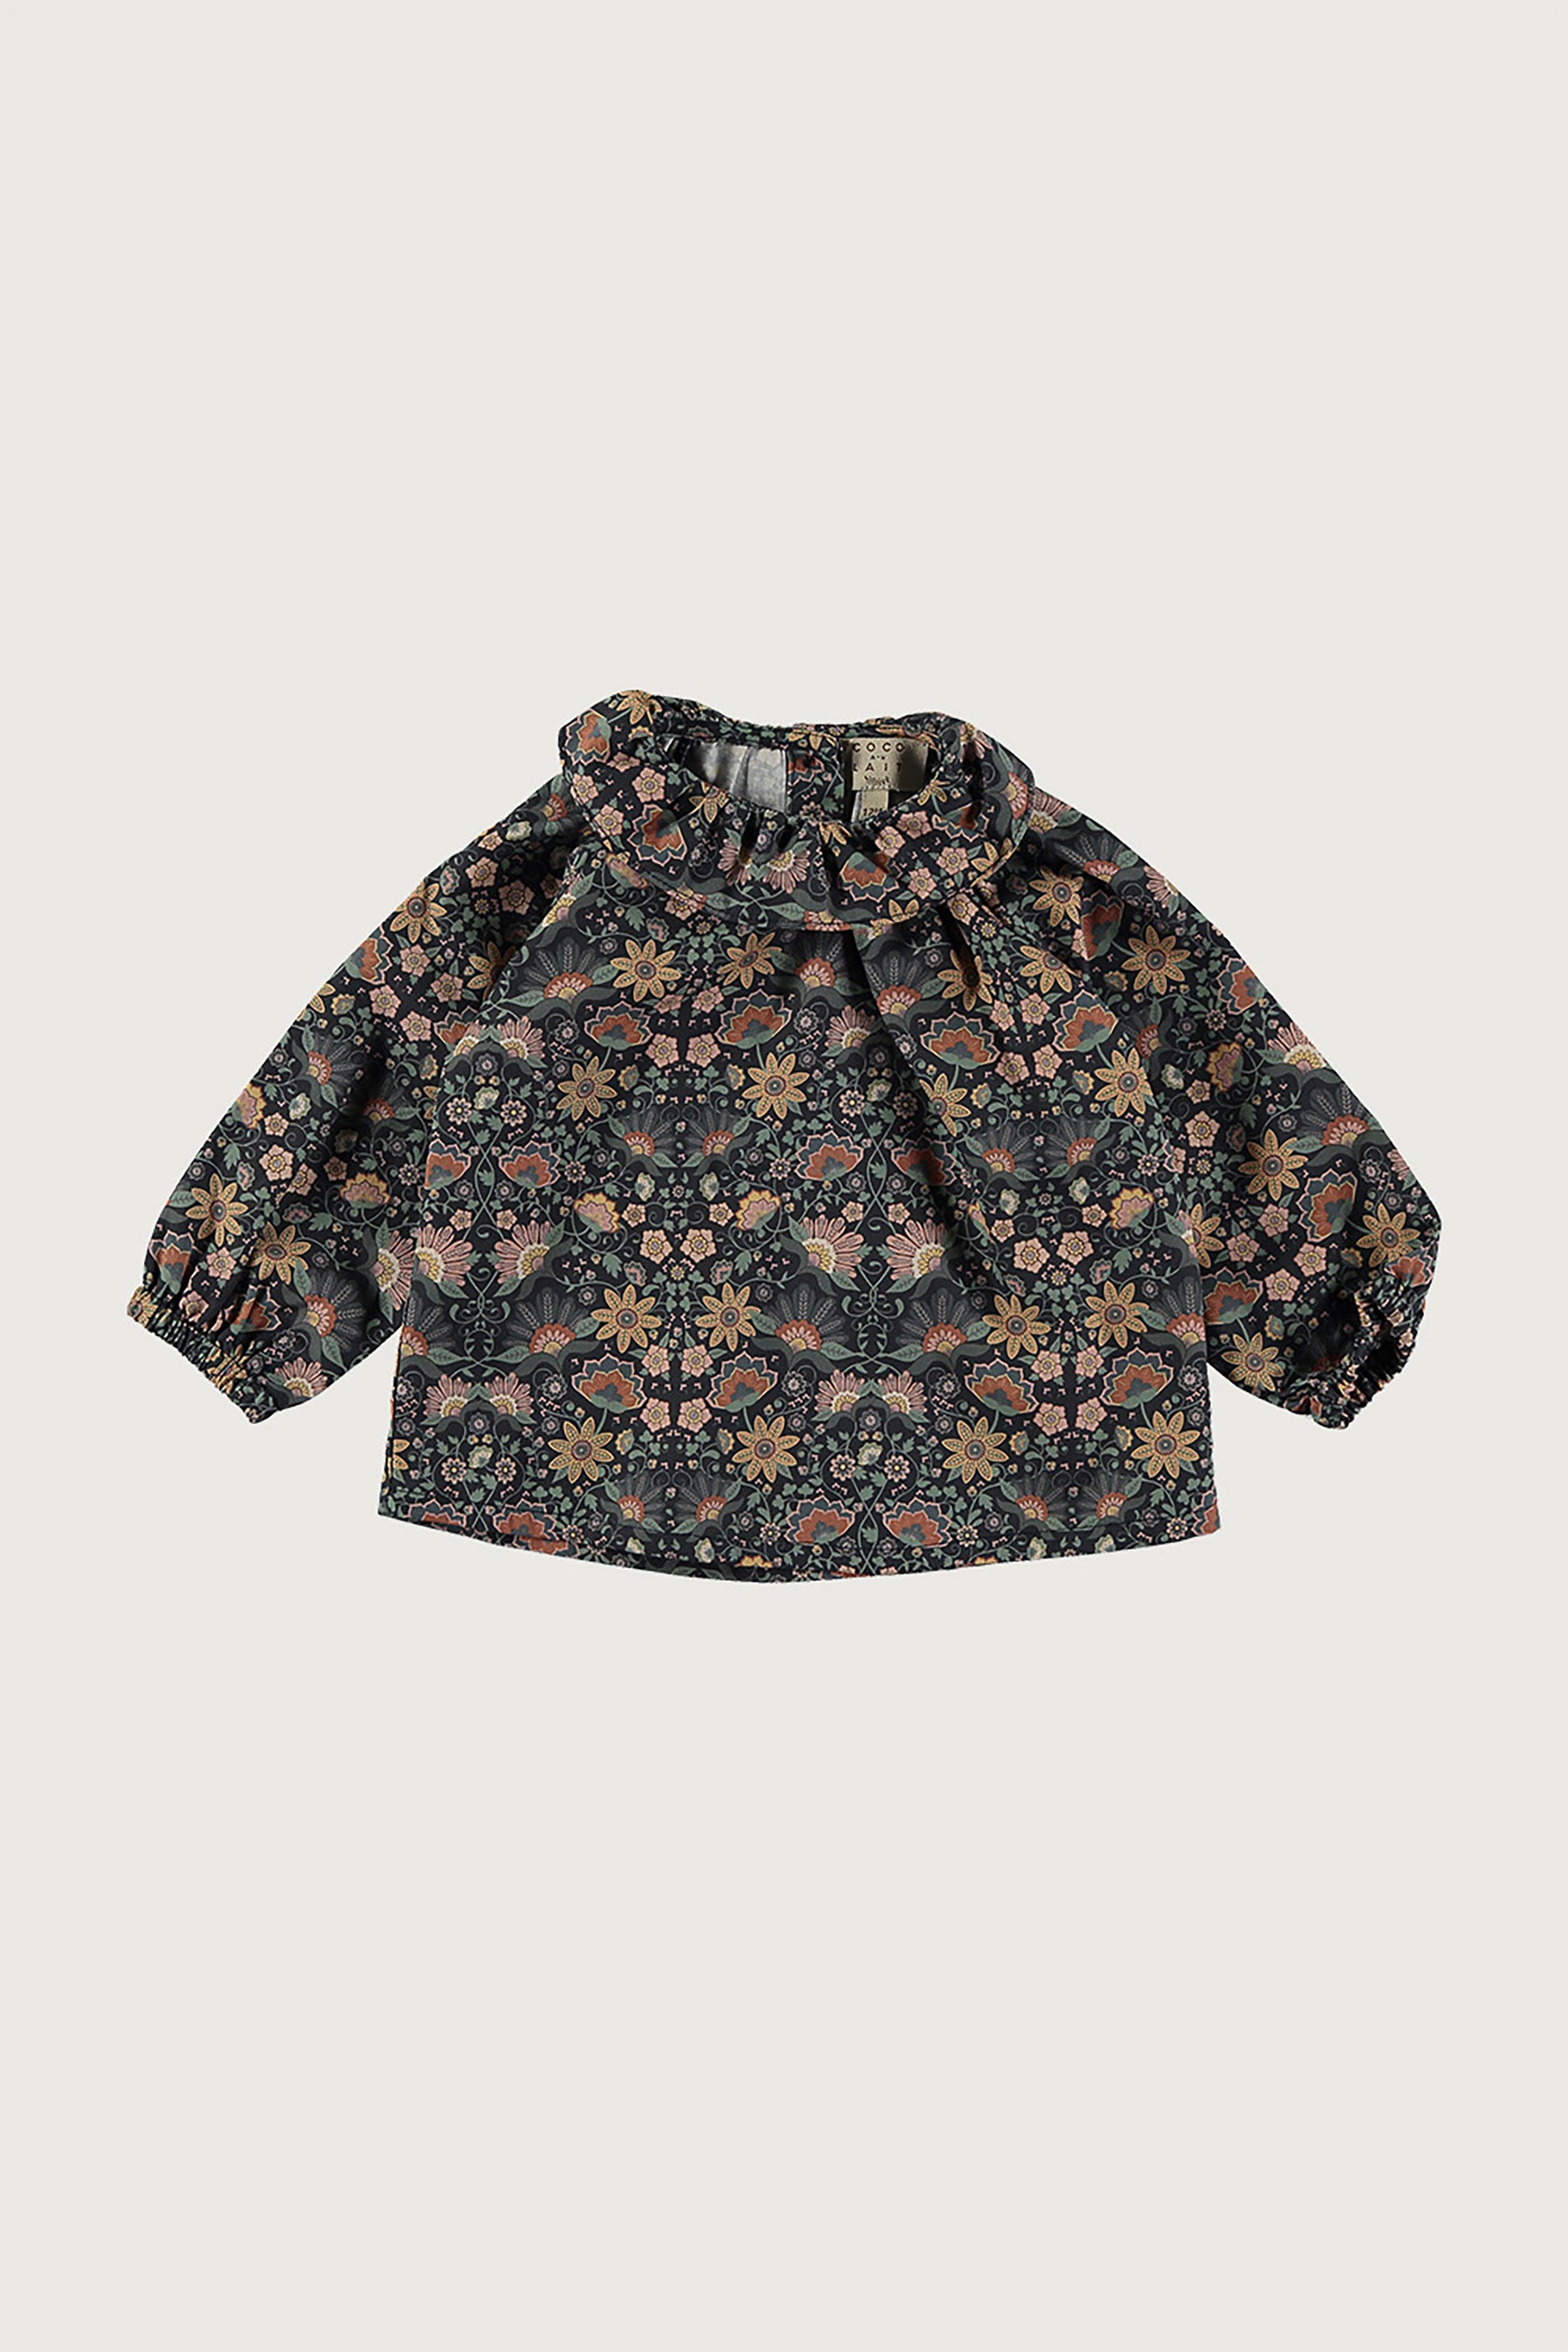 Coco Au Lait MEXICAN FLOWERS BABY BLOUSE  Mexican Flowers